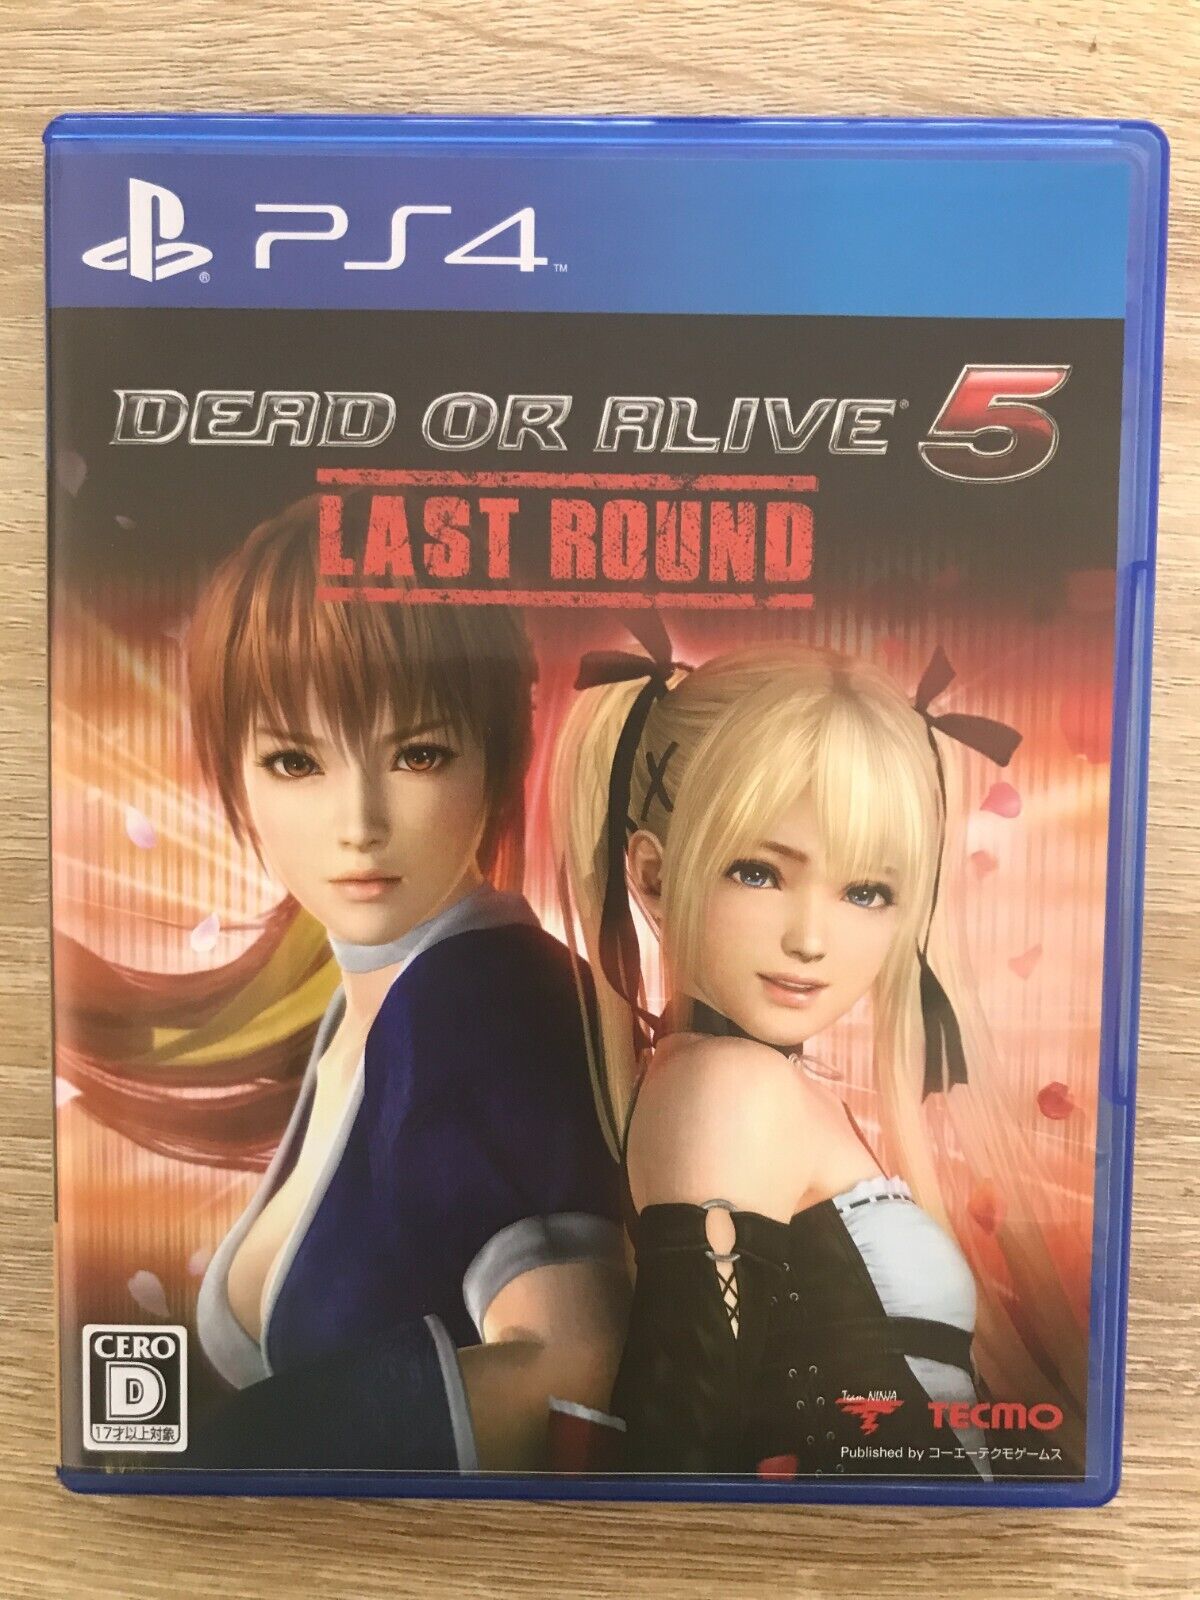 færdig kobling Downtown DEAD OR ALIVE 5 Last Round Sony Playstation 4 PS4 Games From Japan USED  4988615067716 | eBay